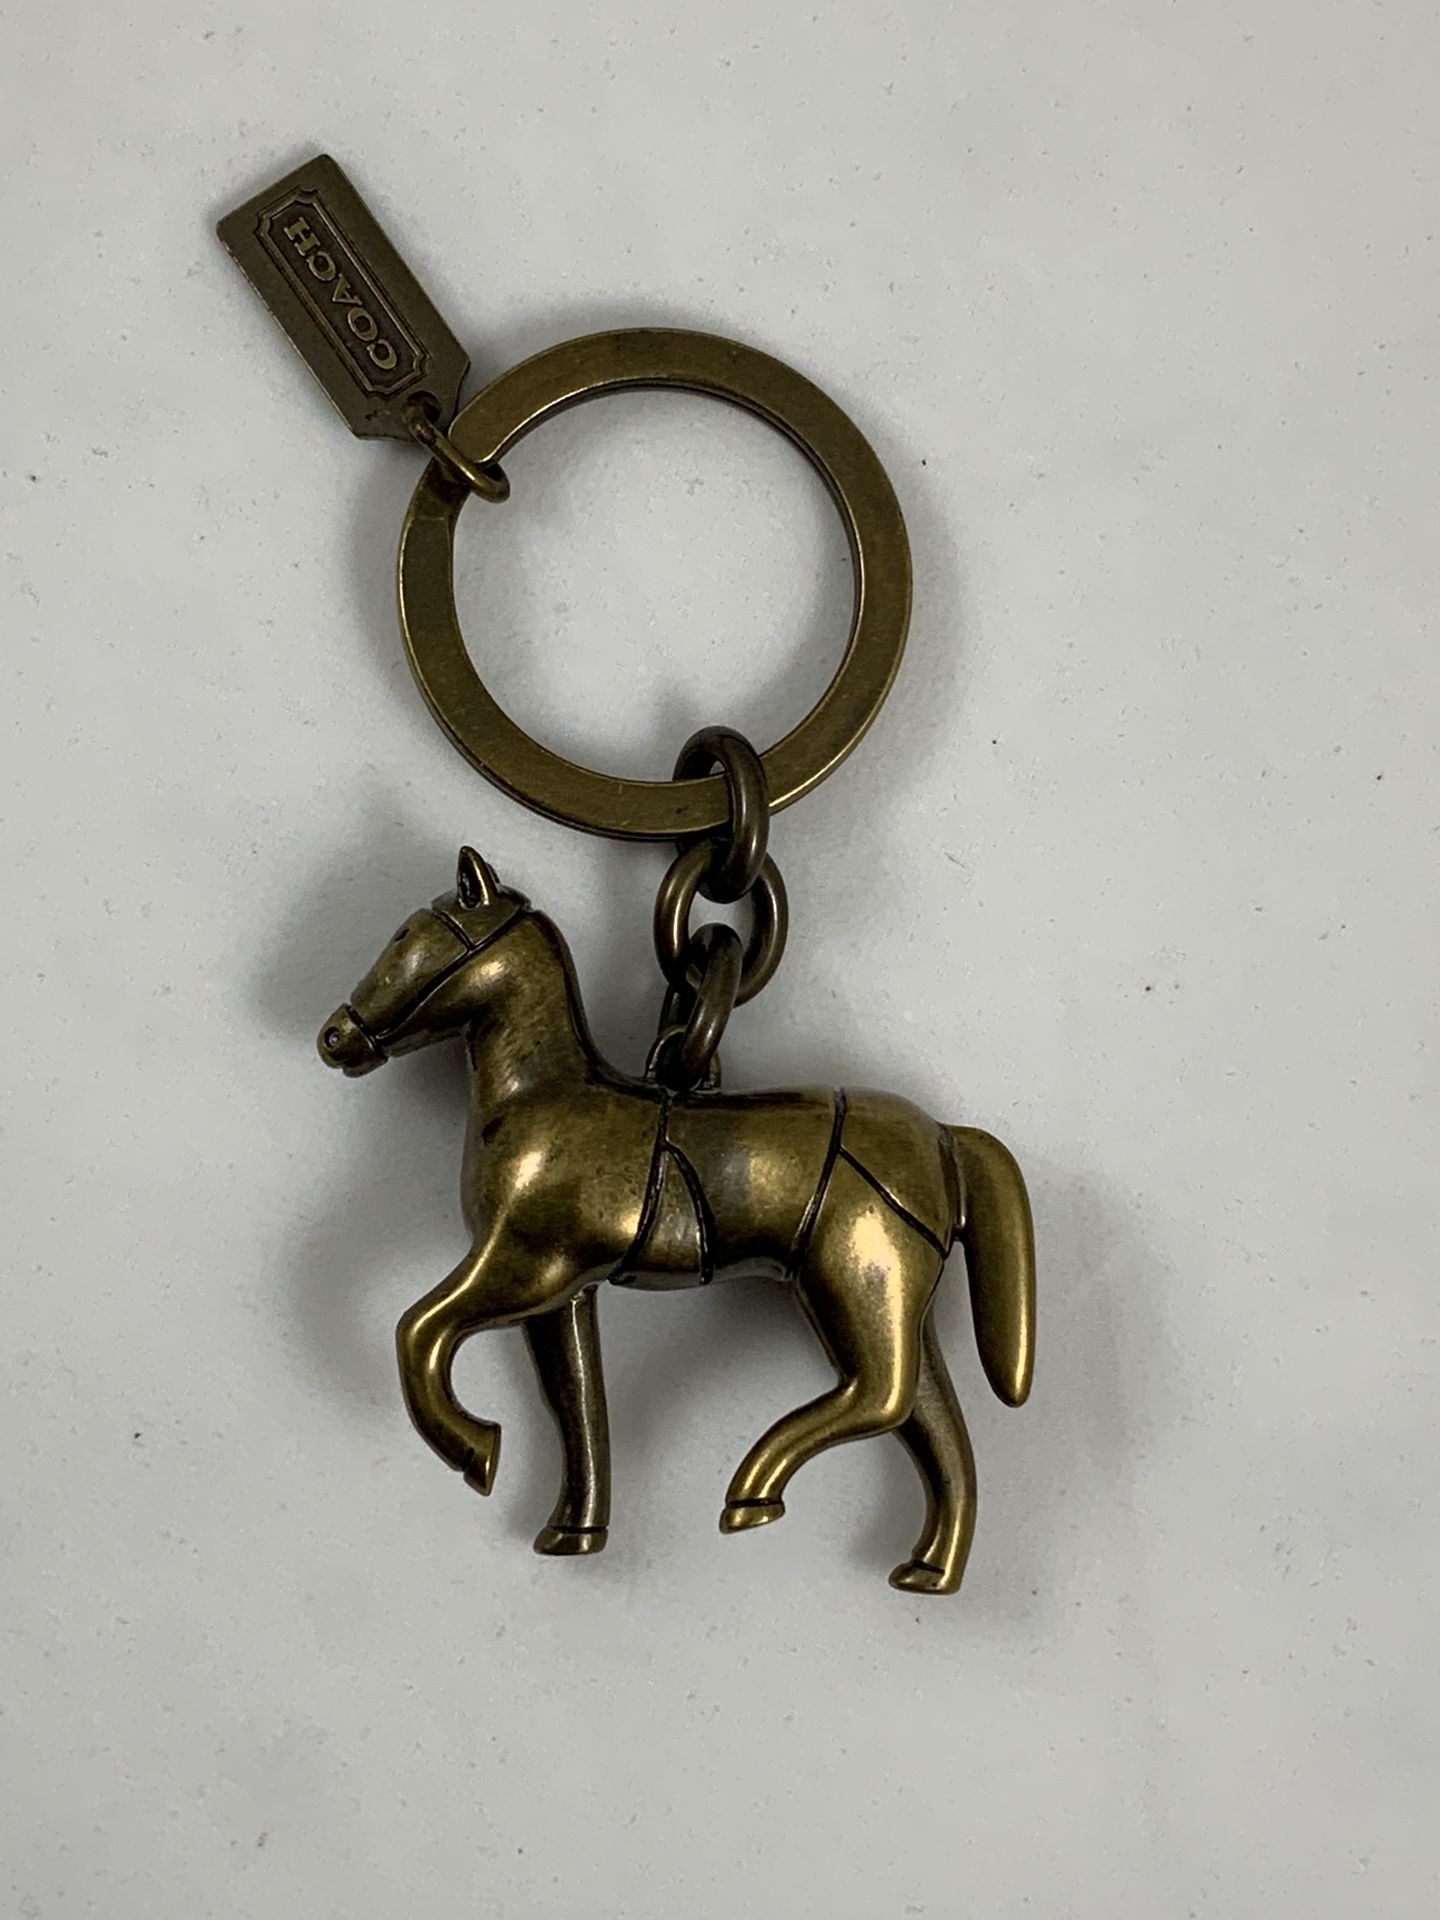 NWOT🌟COACH Limited Edition Extremely Rare Horse Keychain Purse Fob Bag Charm